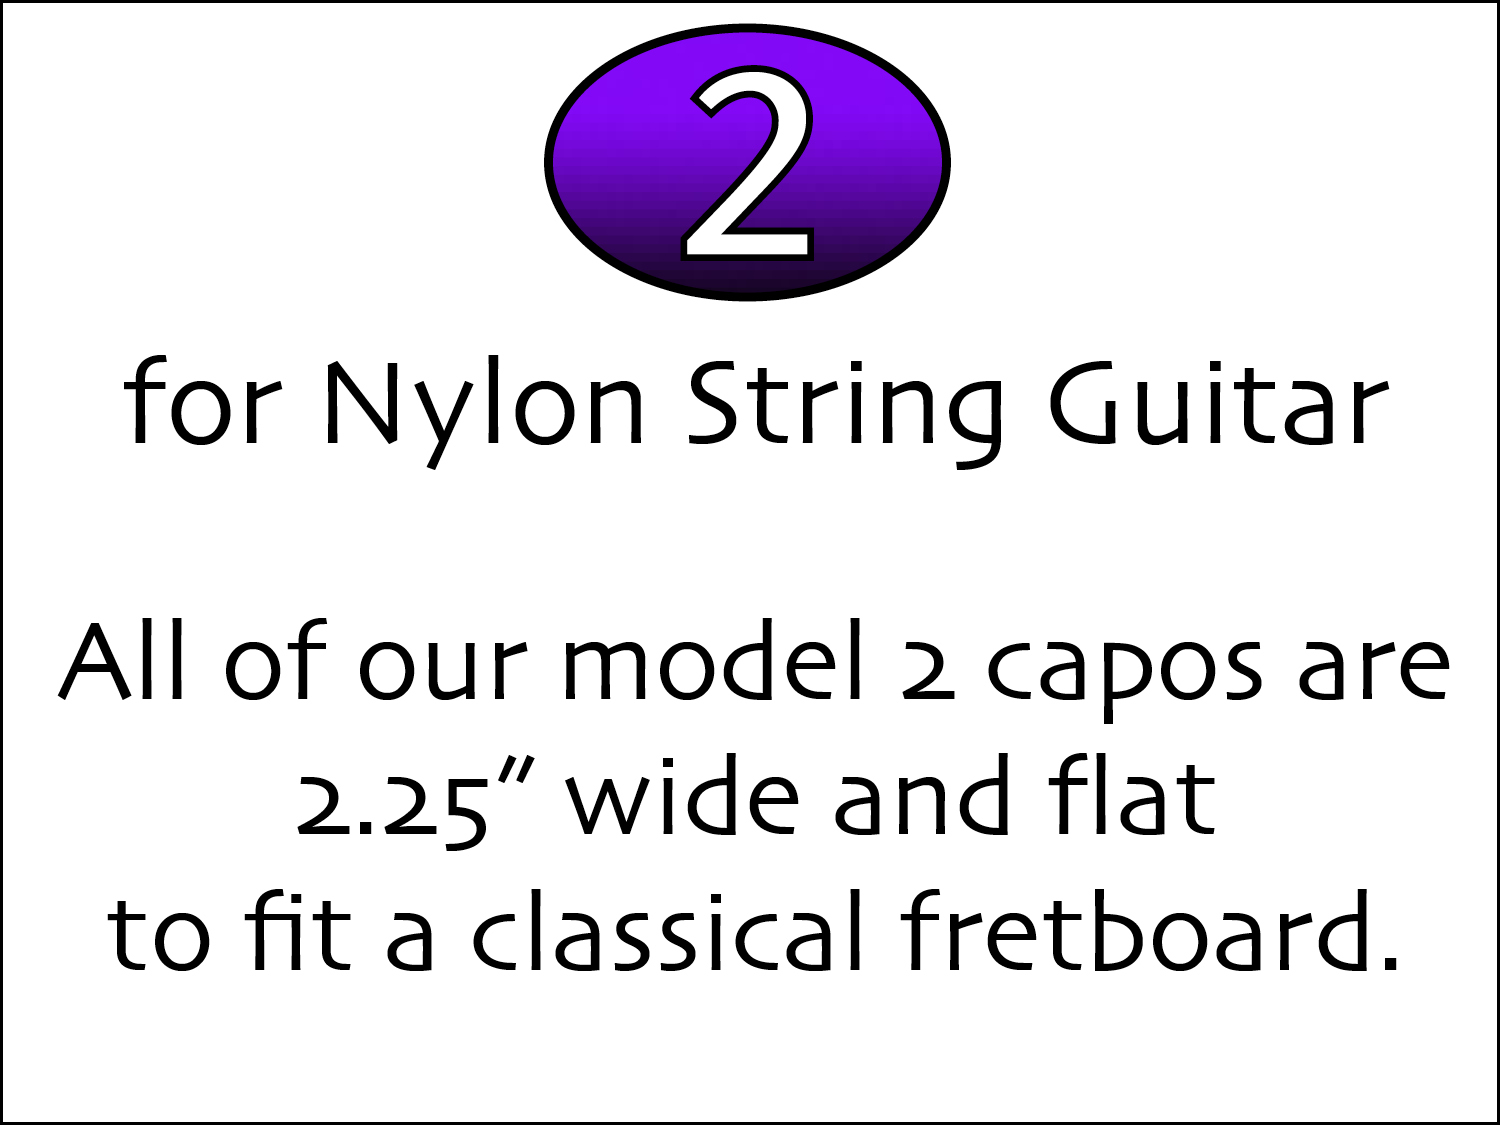 2. for NYLON STRING guitar Archives - Shubb Capos